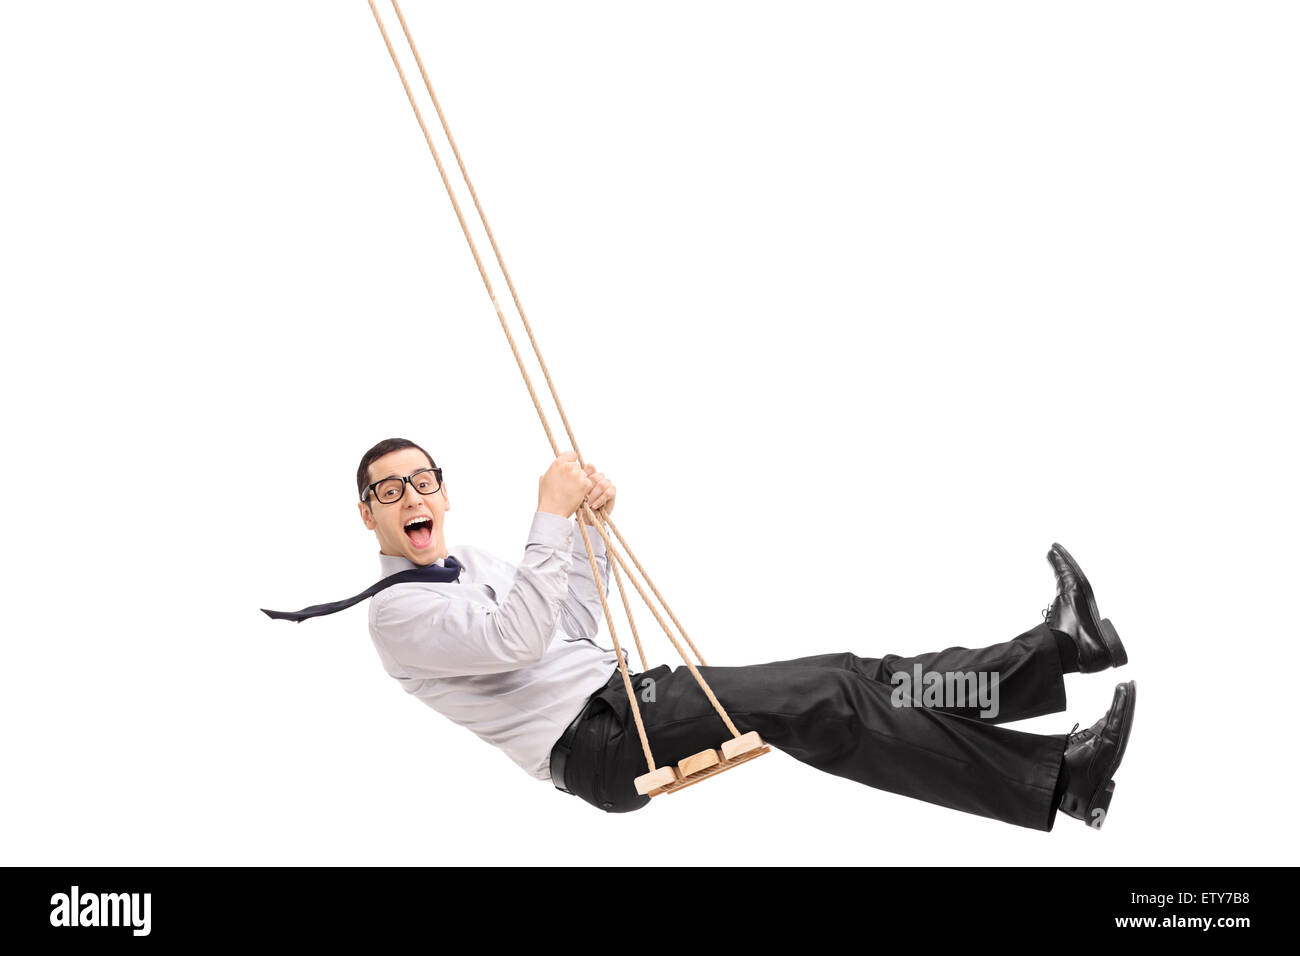 Delighted young man swinging on a swing and looking at the camera isolated on white background Stock Photo